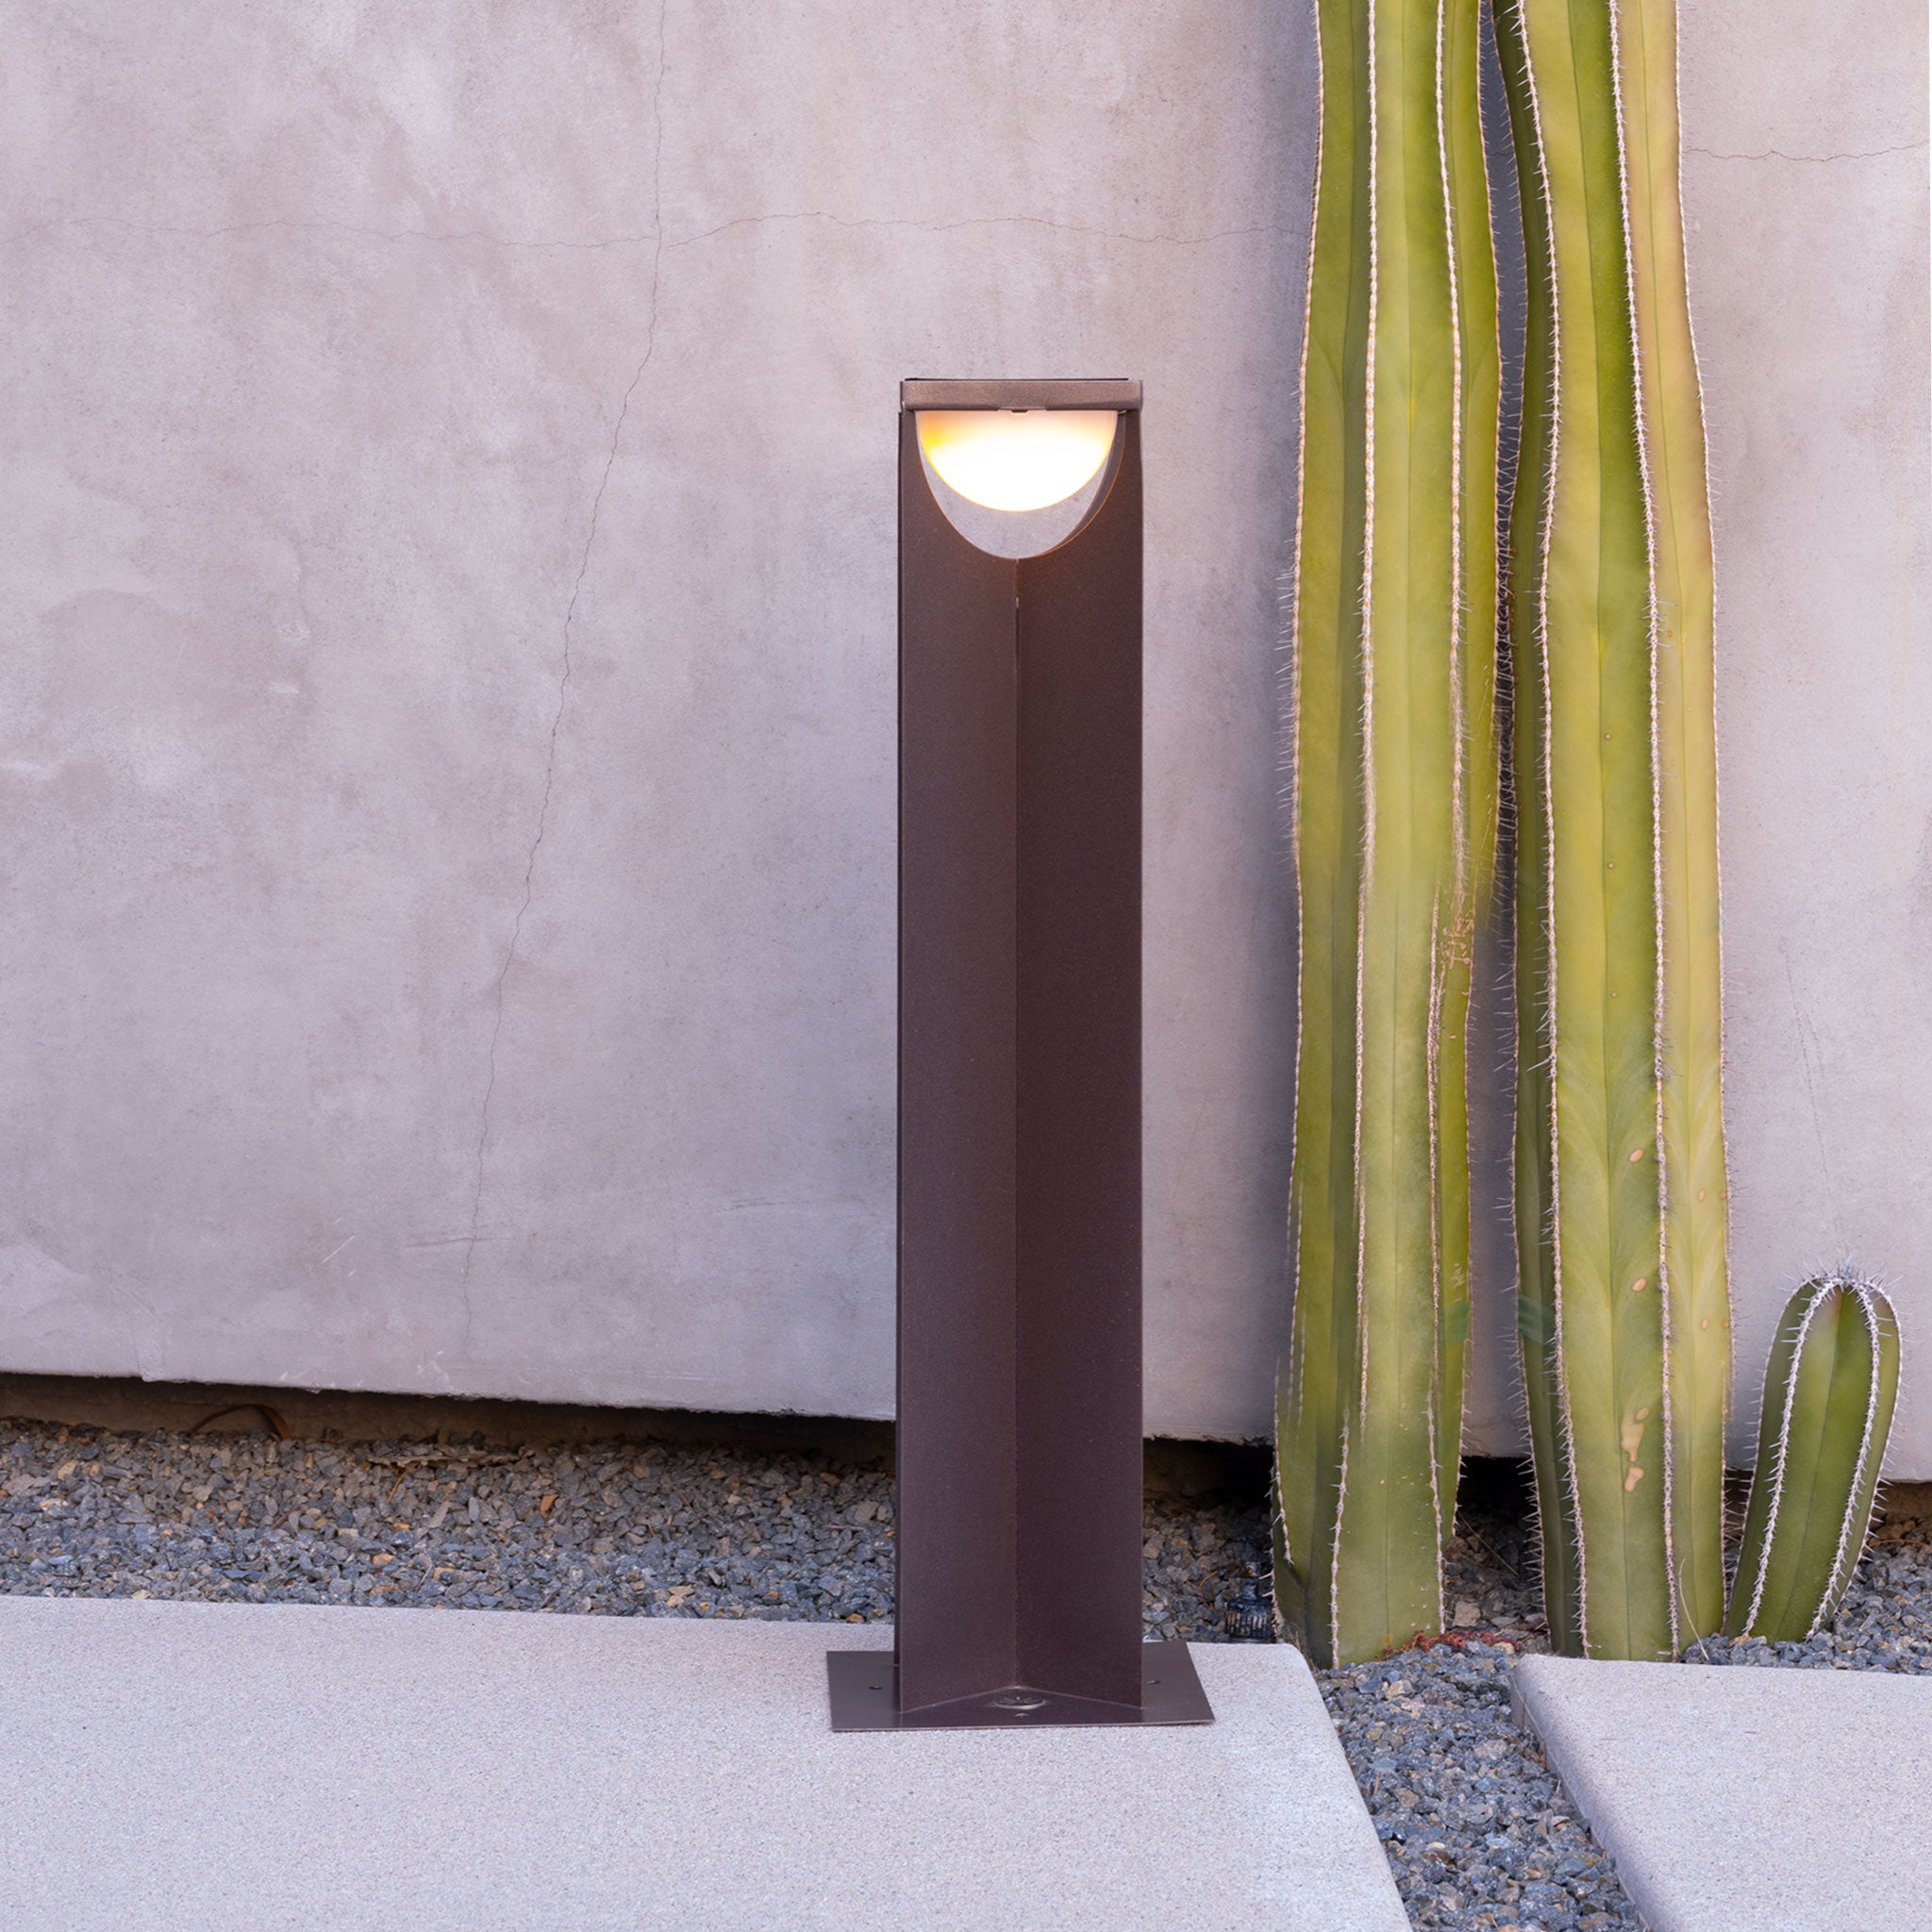 Flow solar light in cafe finish in the desert with cactus